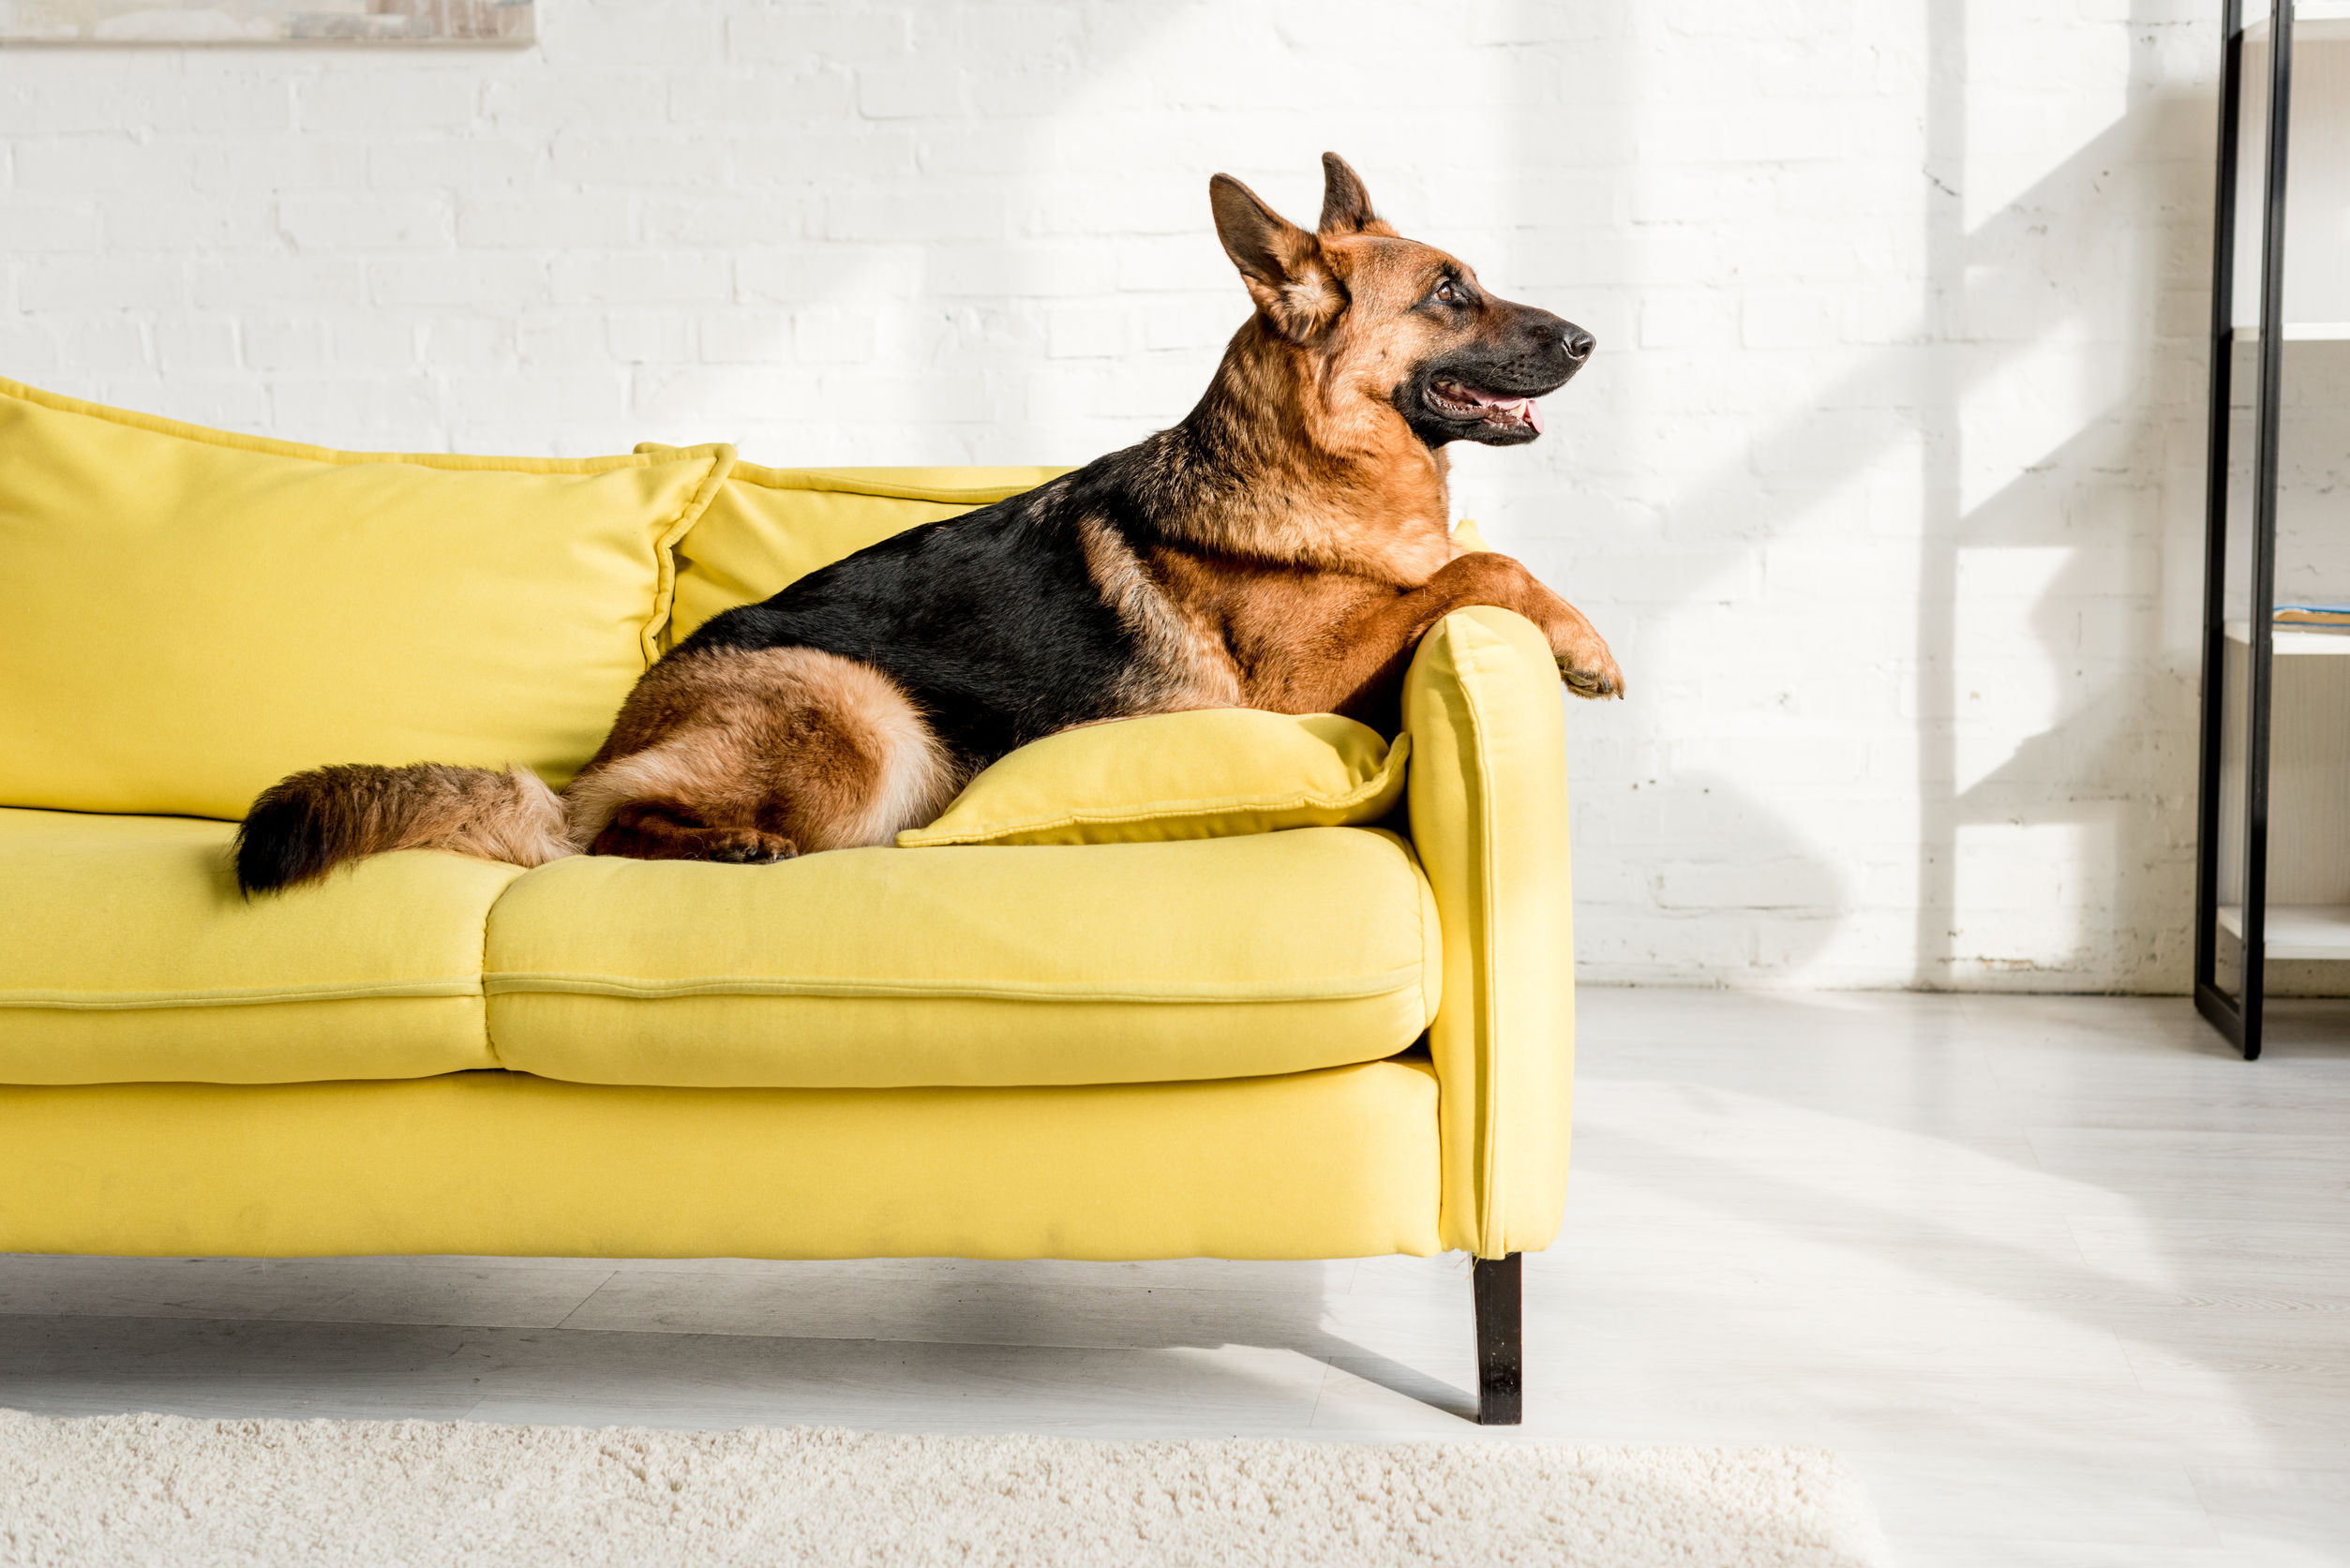 6 Tips for Raising a Dog in an Apartment